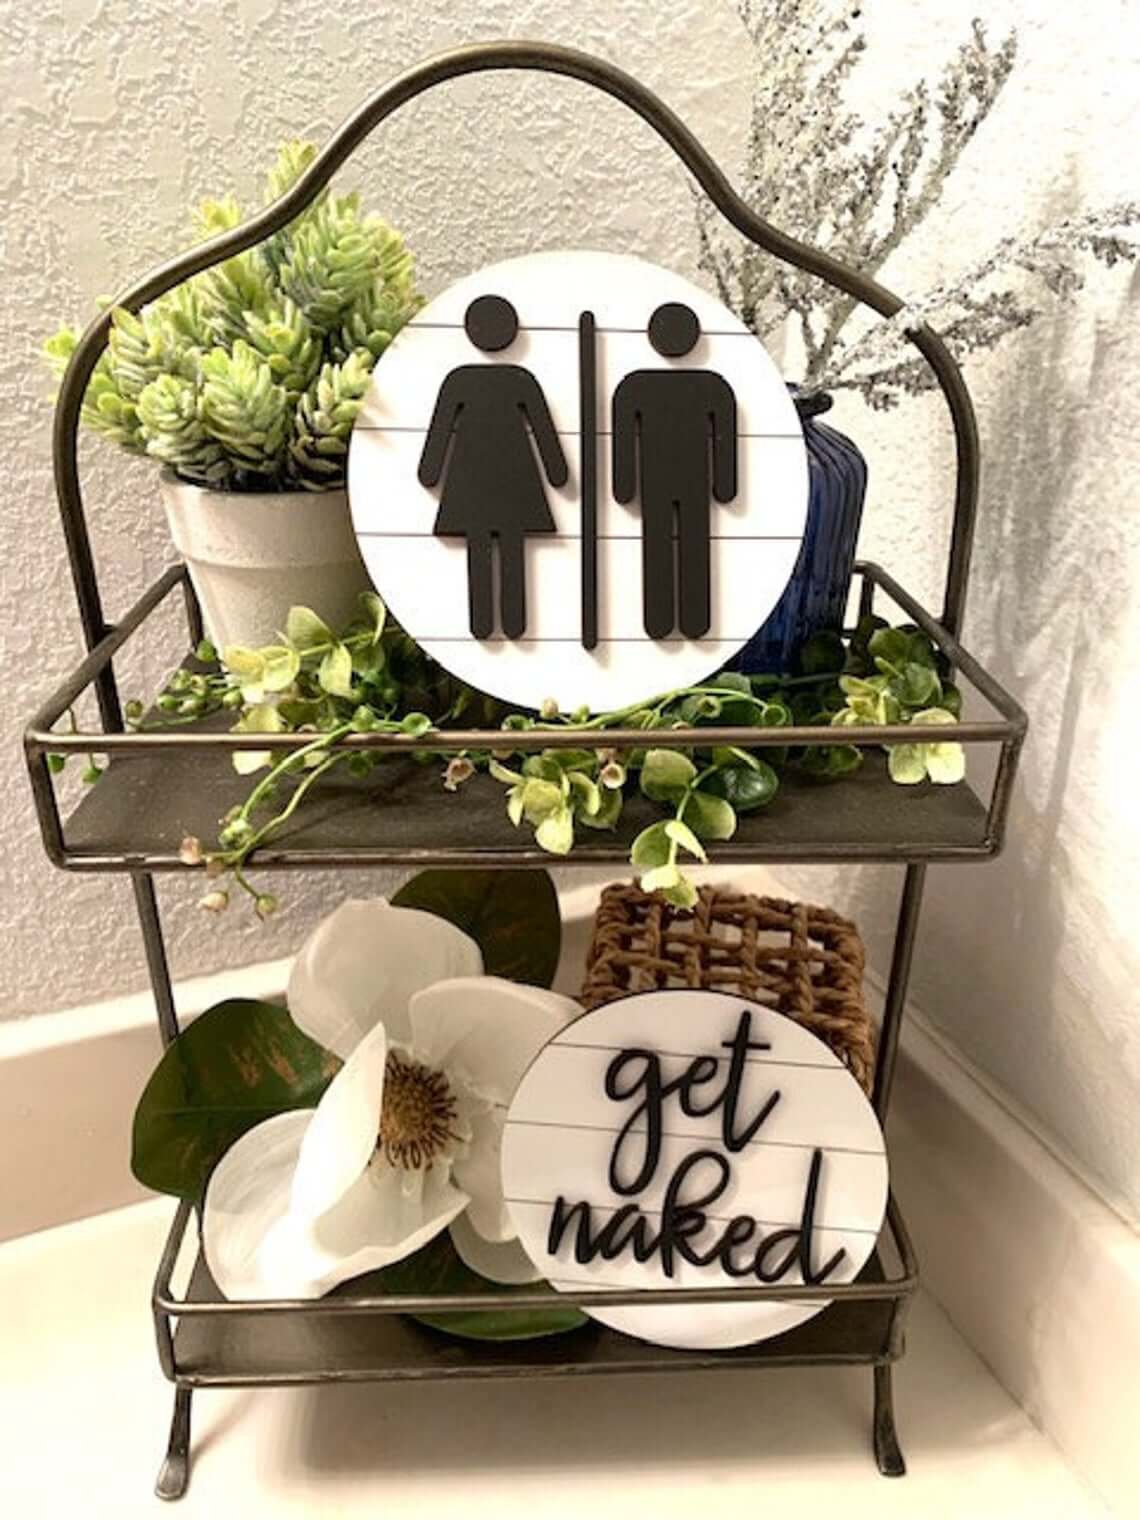 Get Naked Potty People Sign